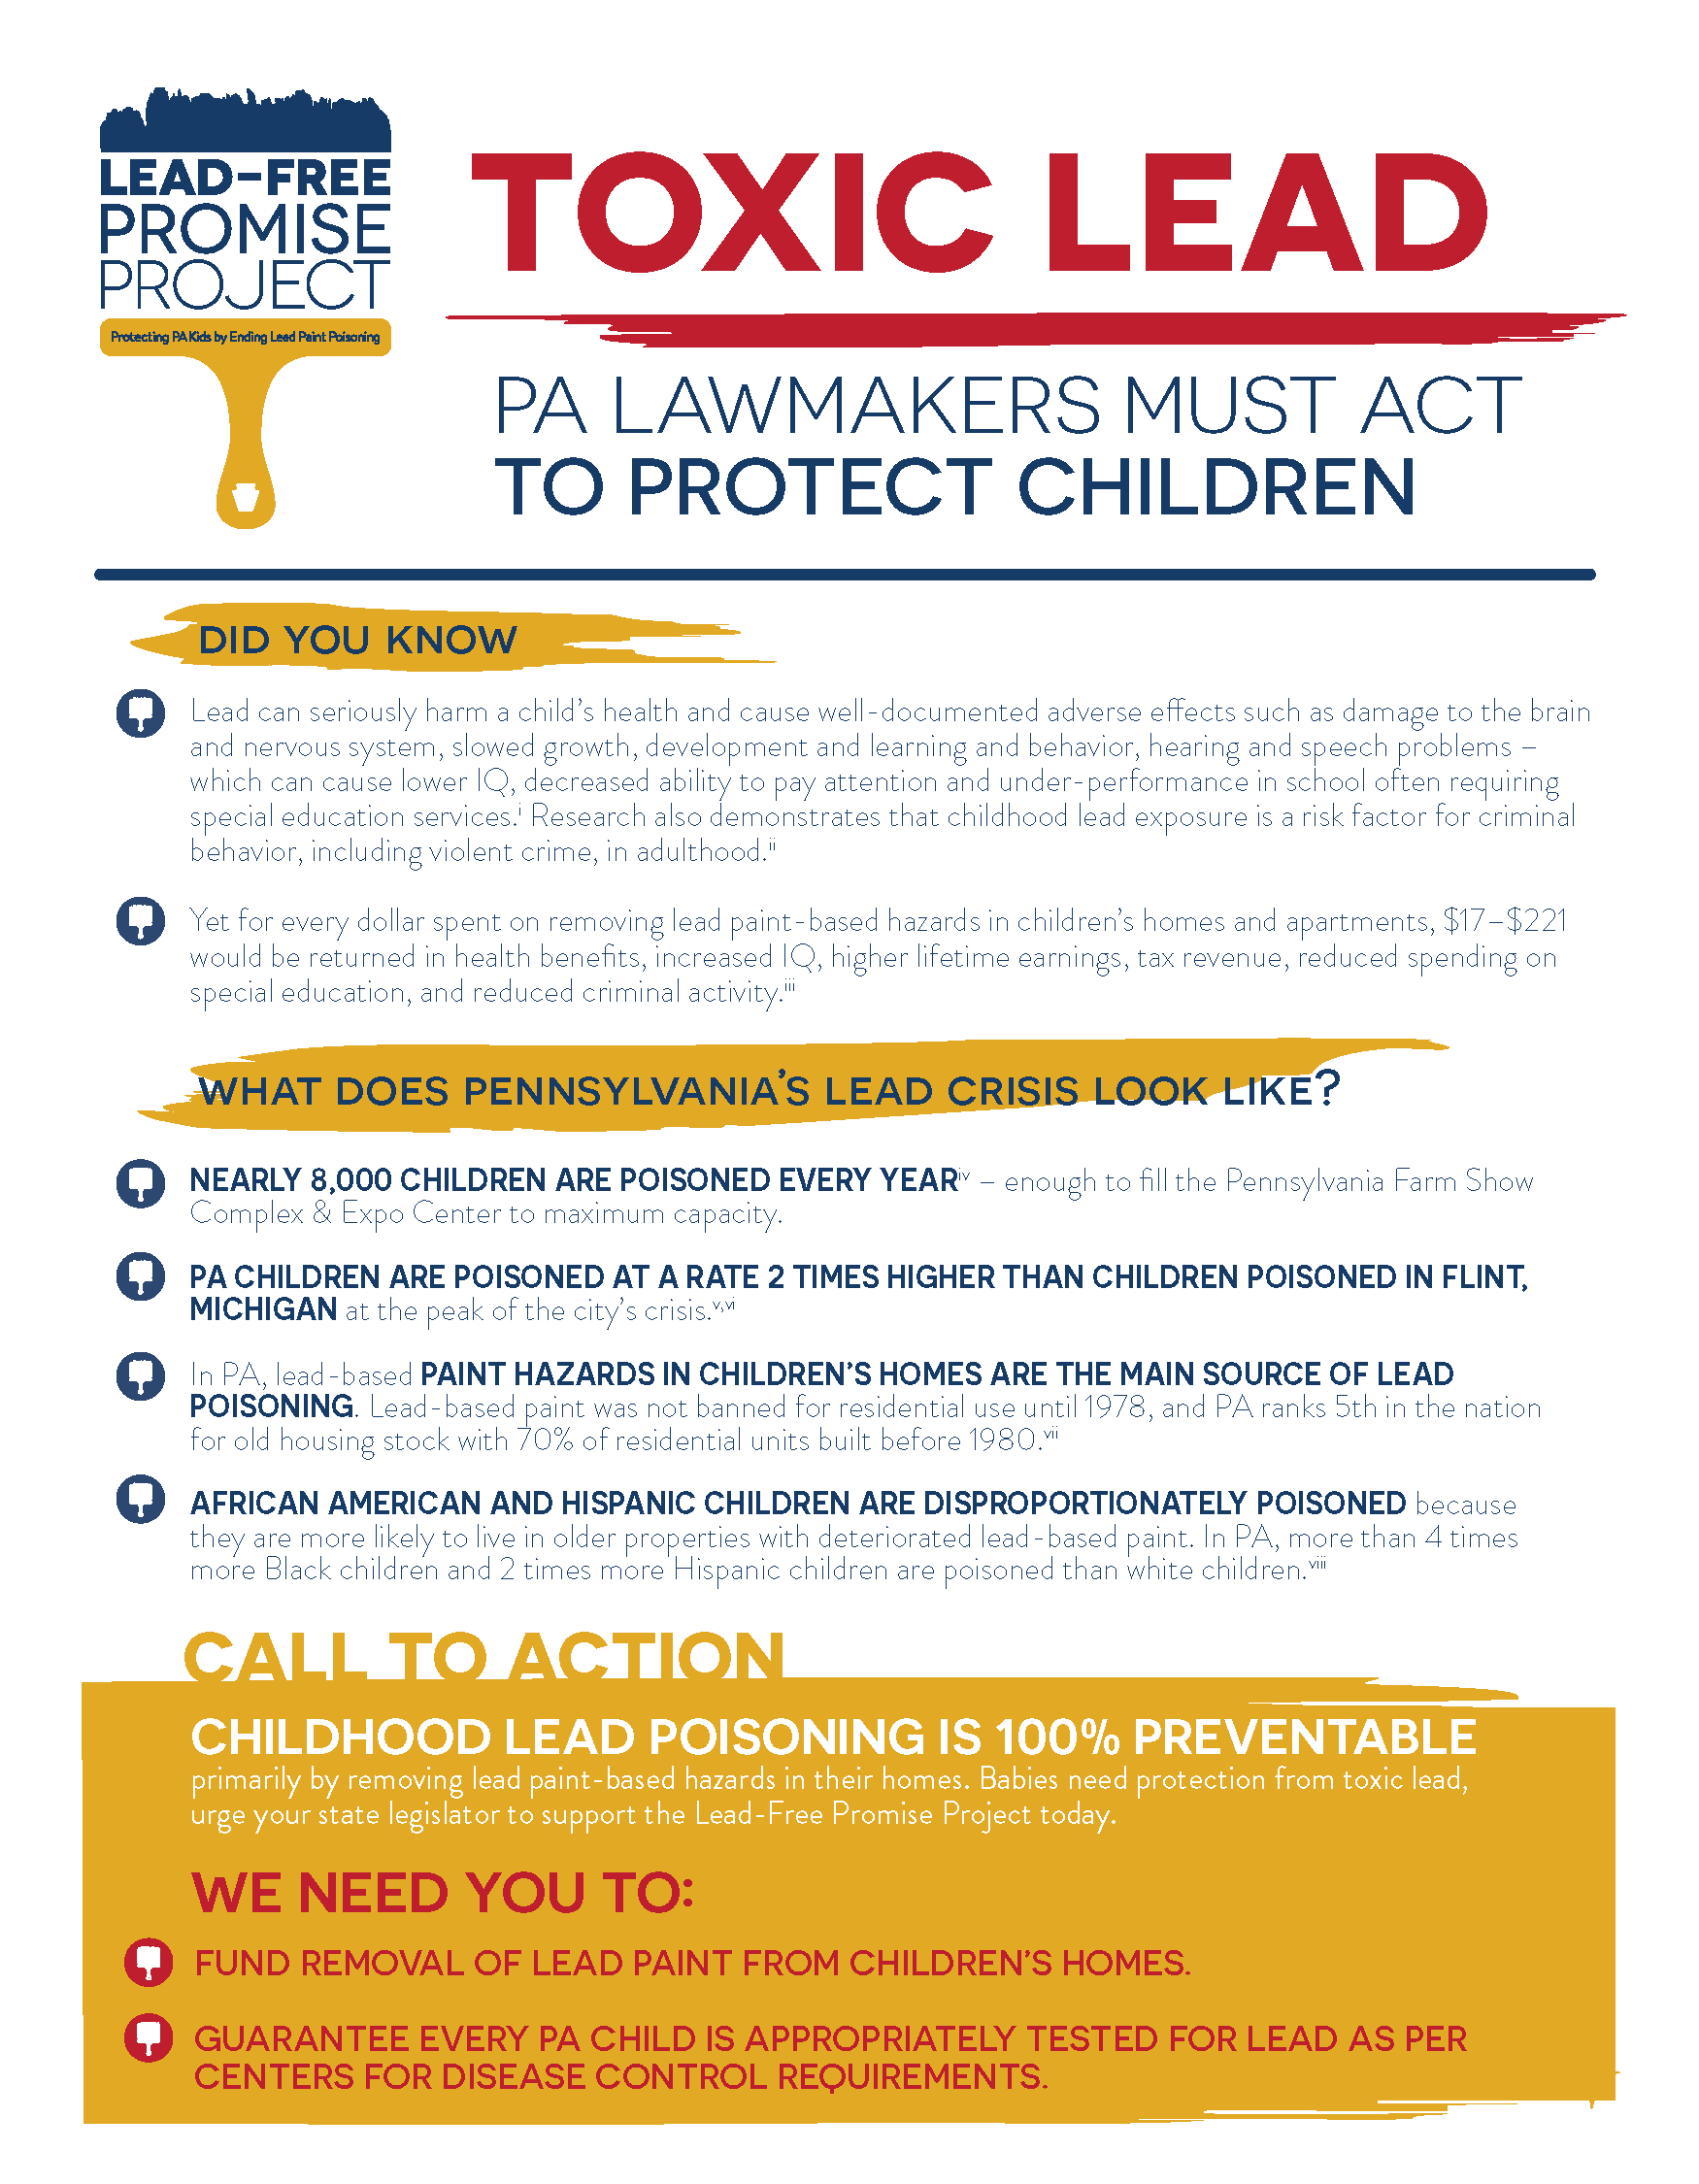 protecting children from harm